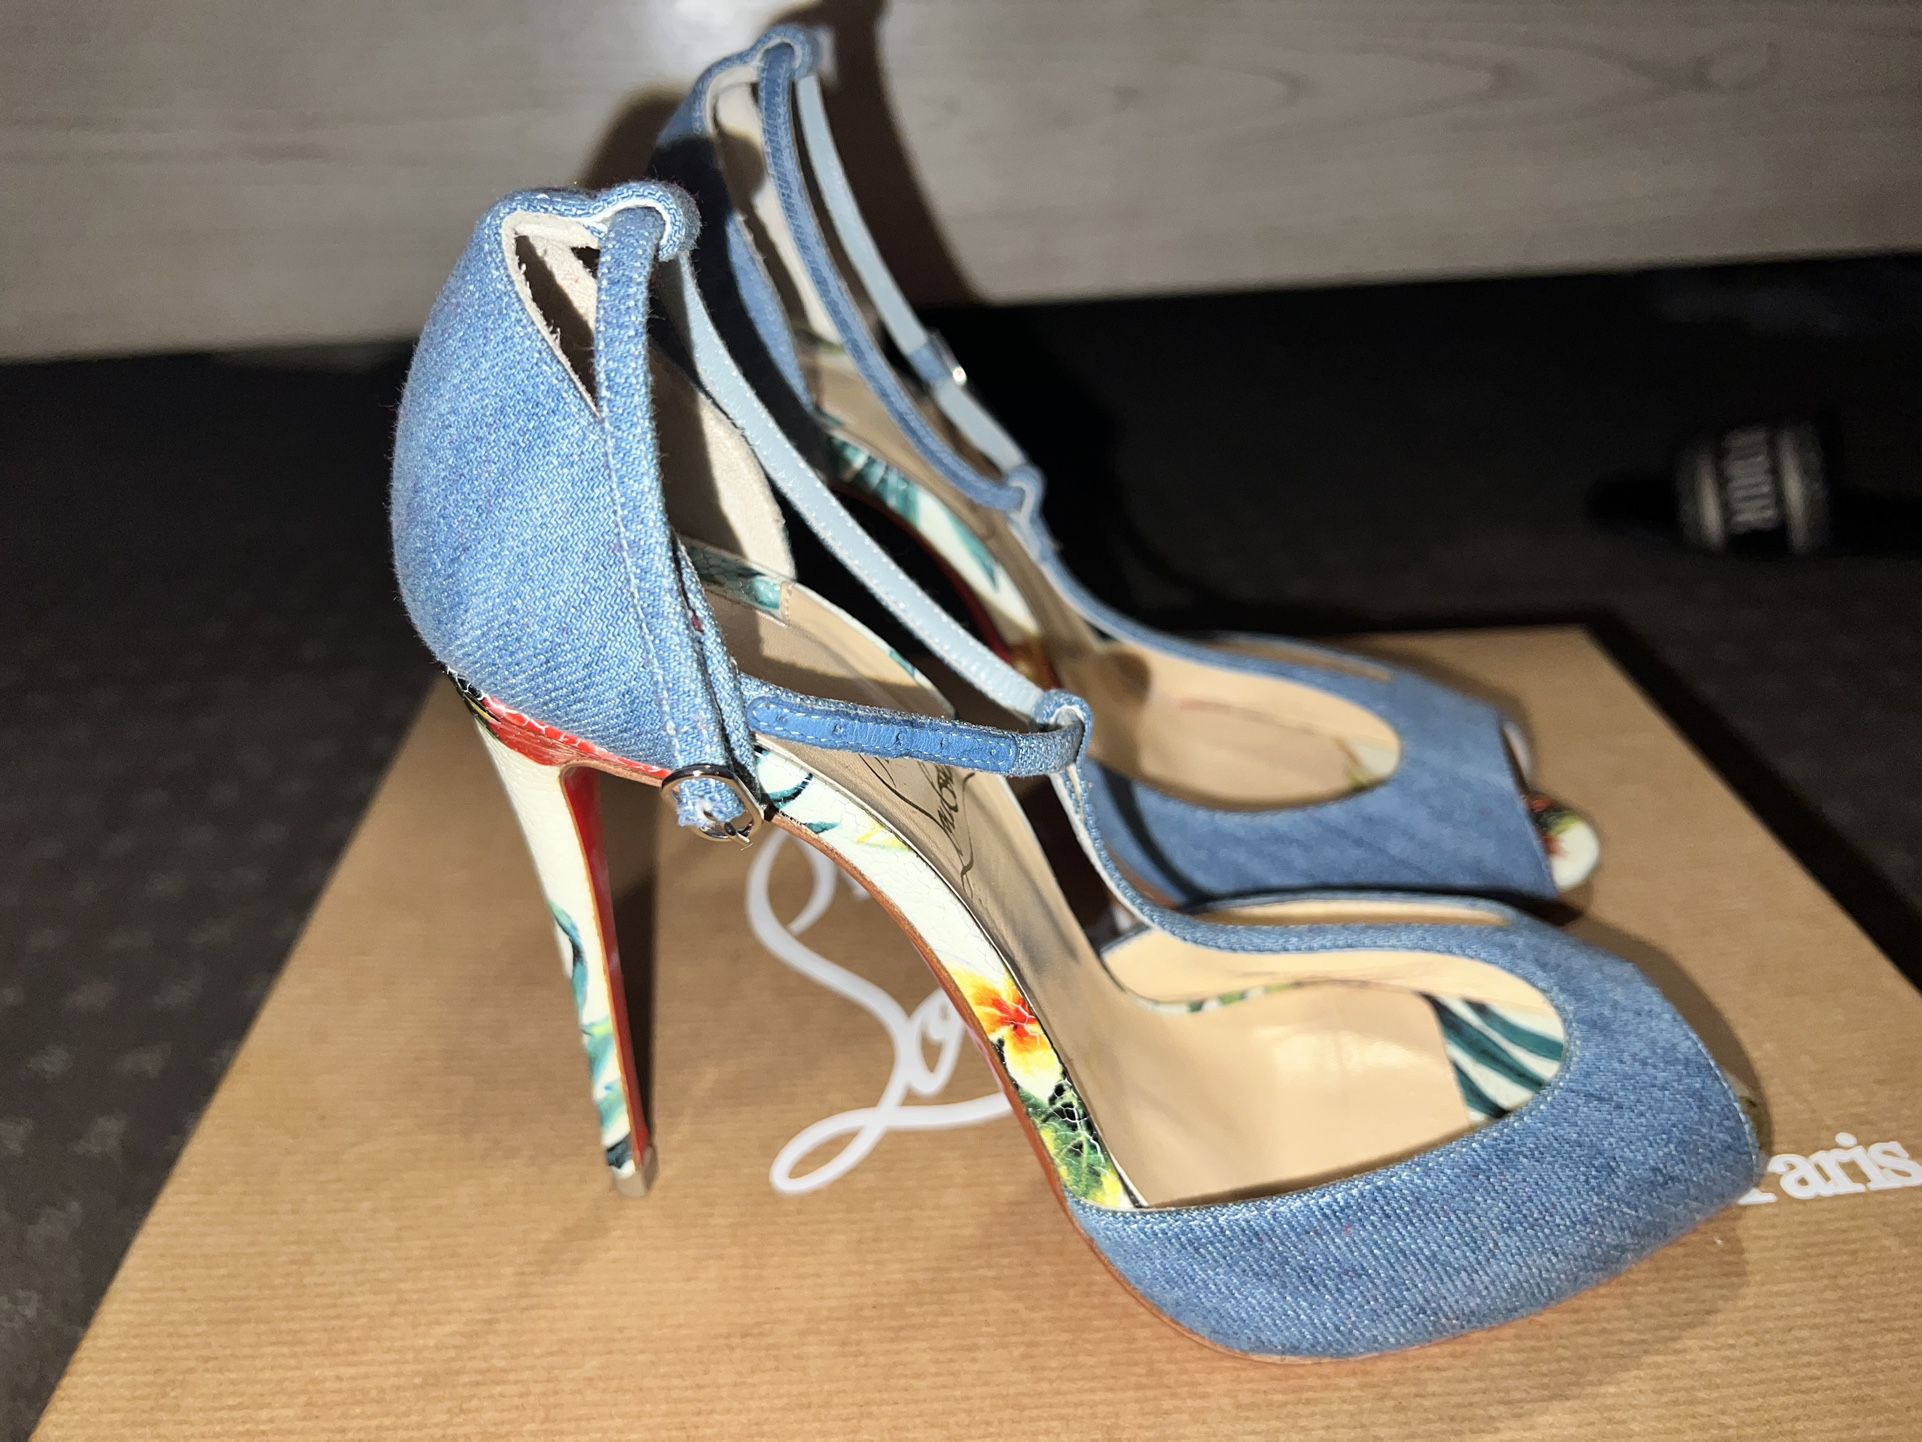 Christian Louboutin Heels (authentic)